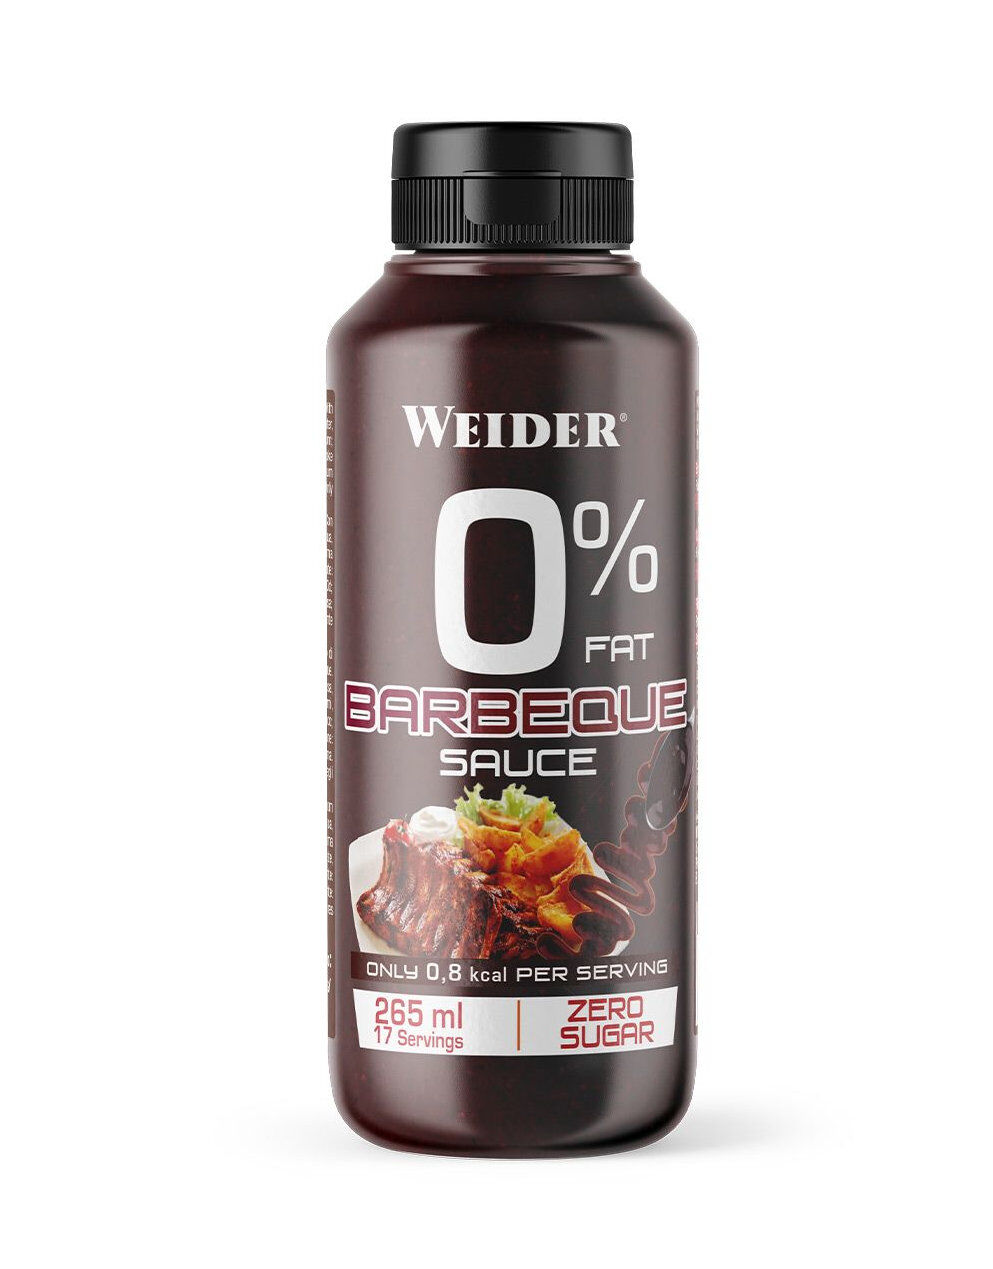 WEIDER Sauces 0% Fat Barbeque 265ml Barbeque